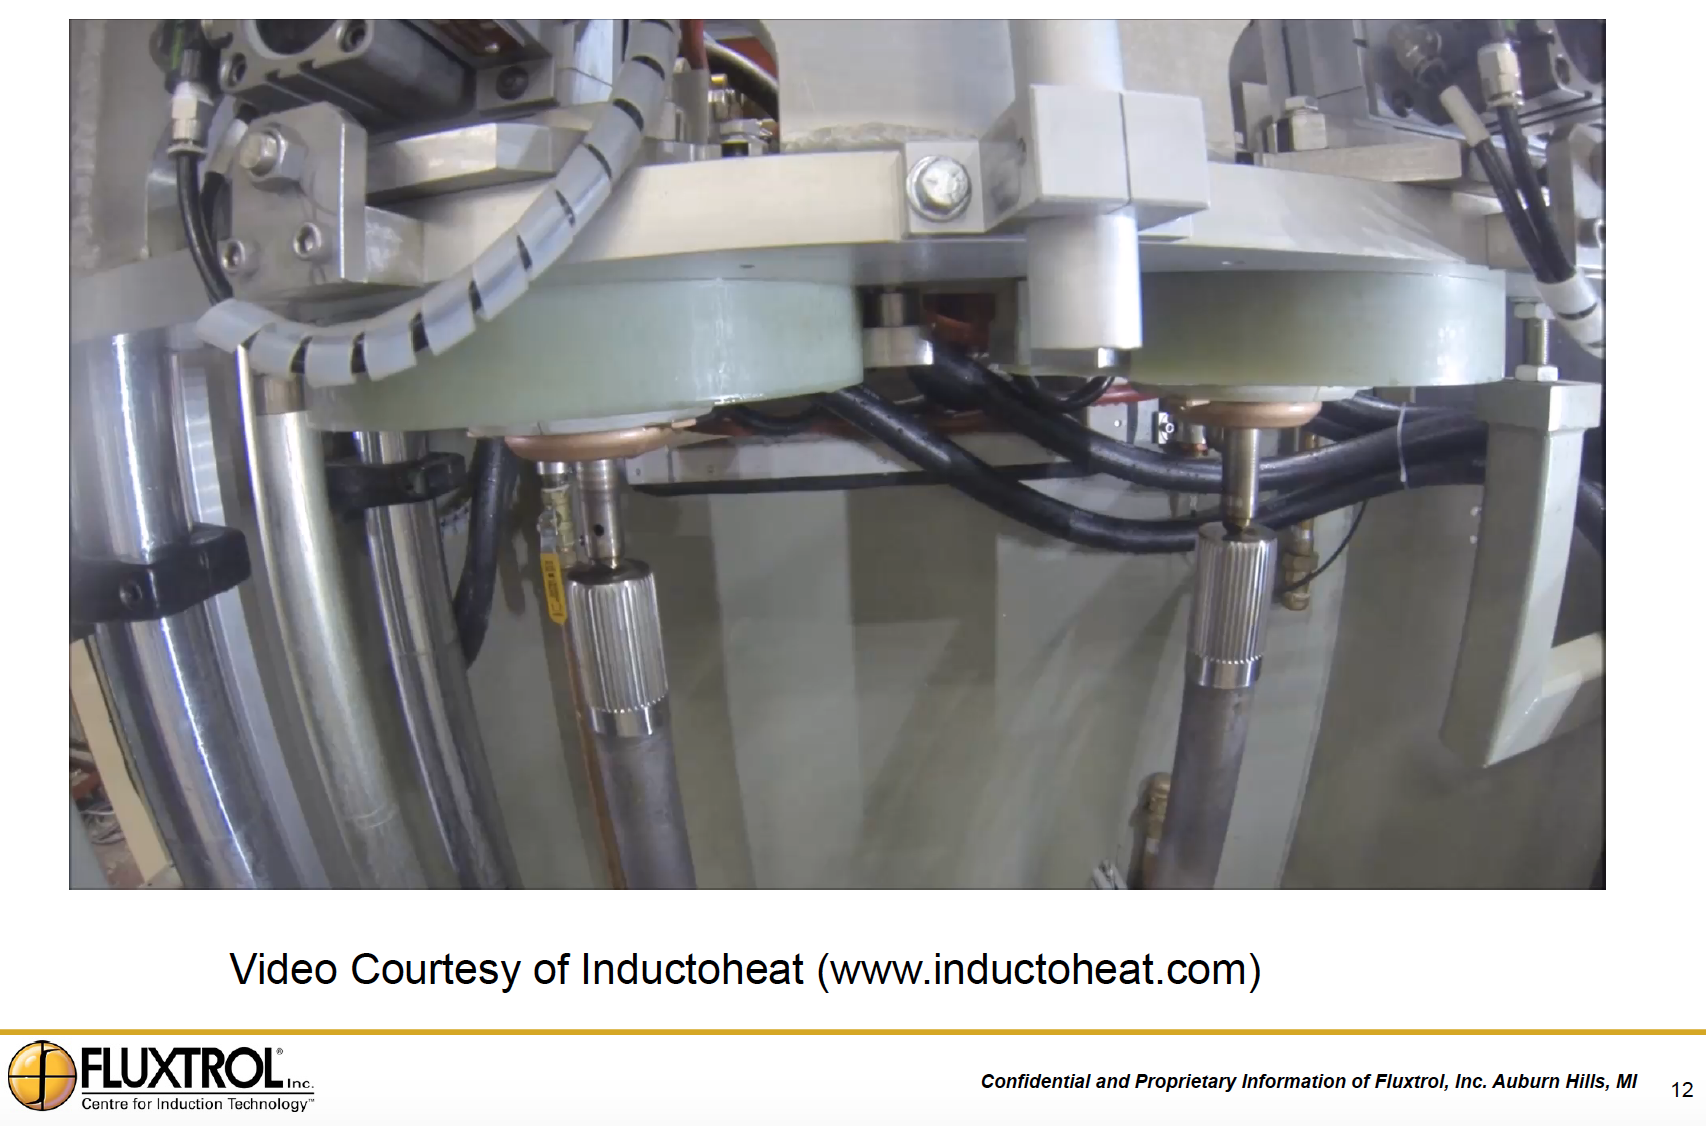 Fluxtrol | Applications of Induction Heating Enabling Advancement in Materials Science Figure 11 - Real Axle Scan Hardening Process